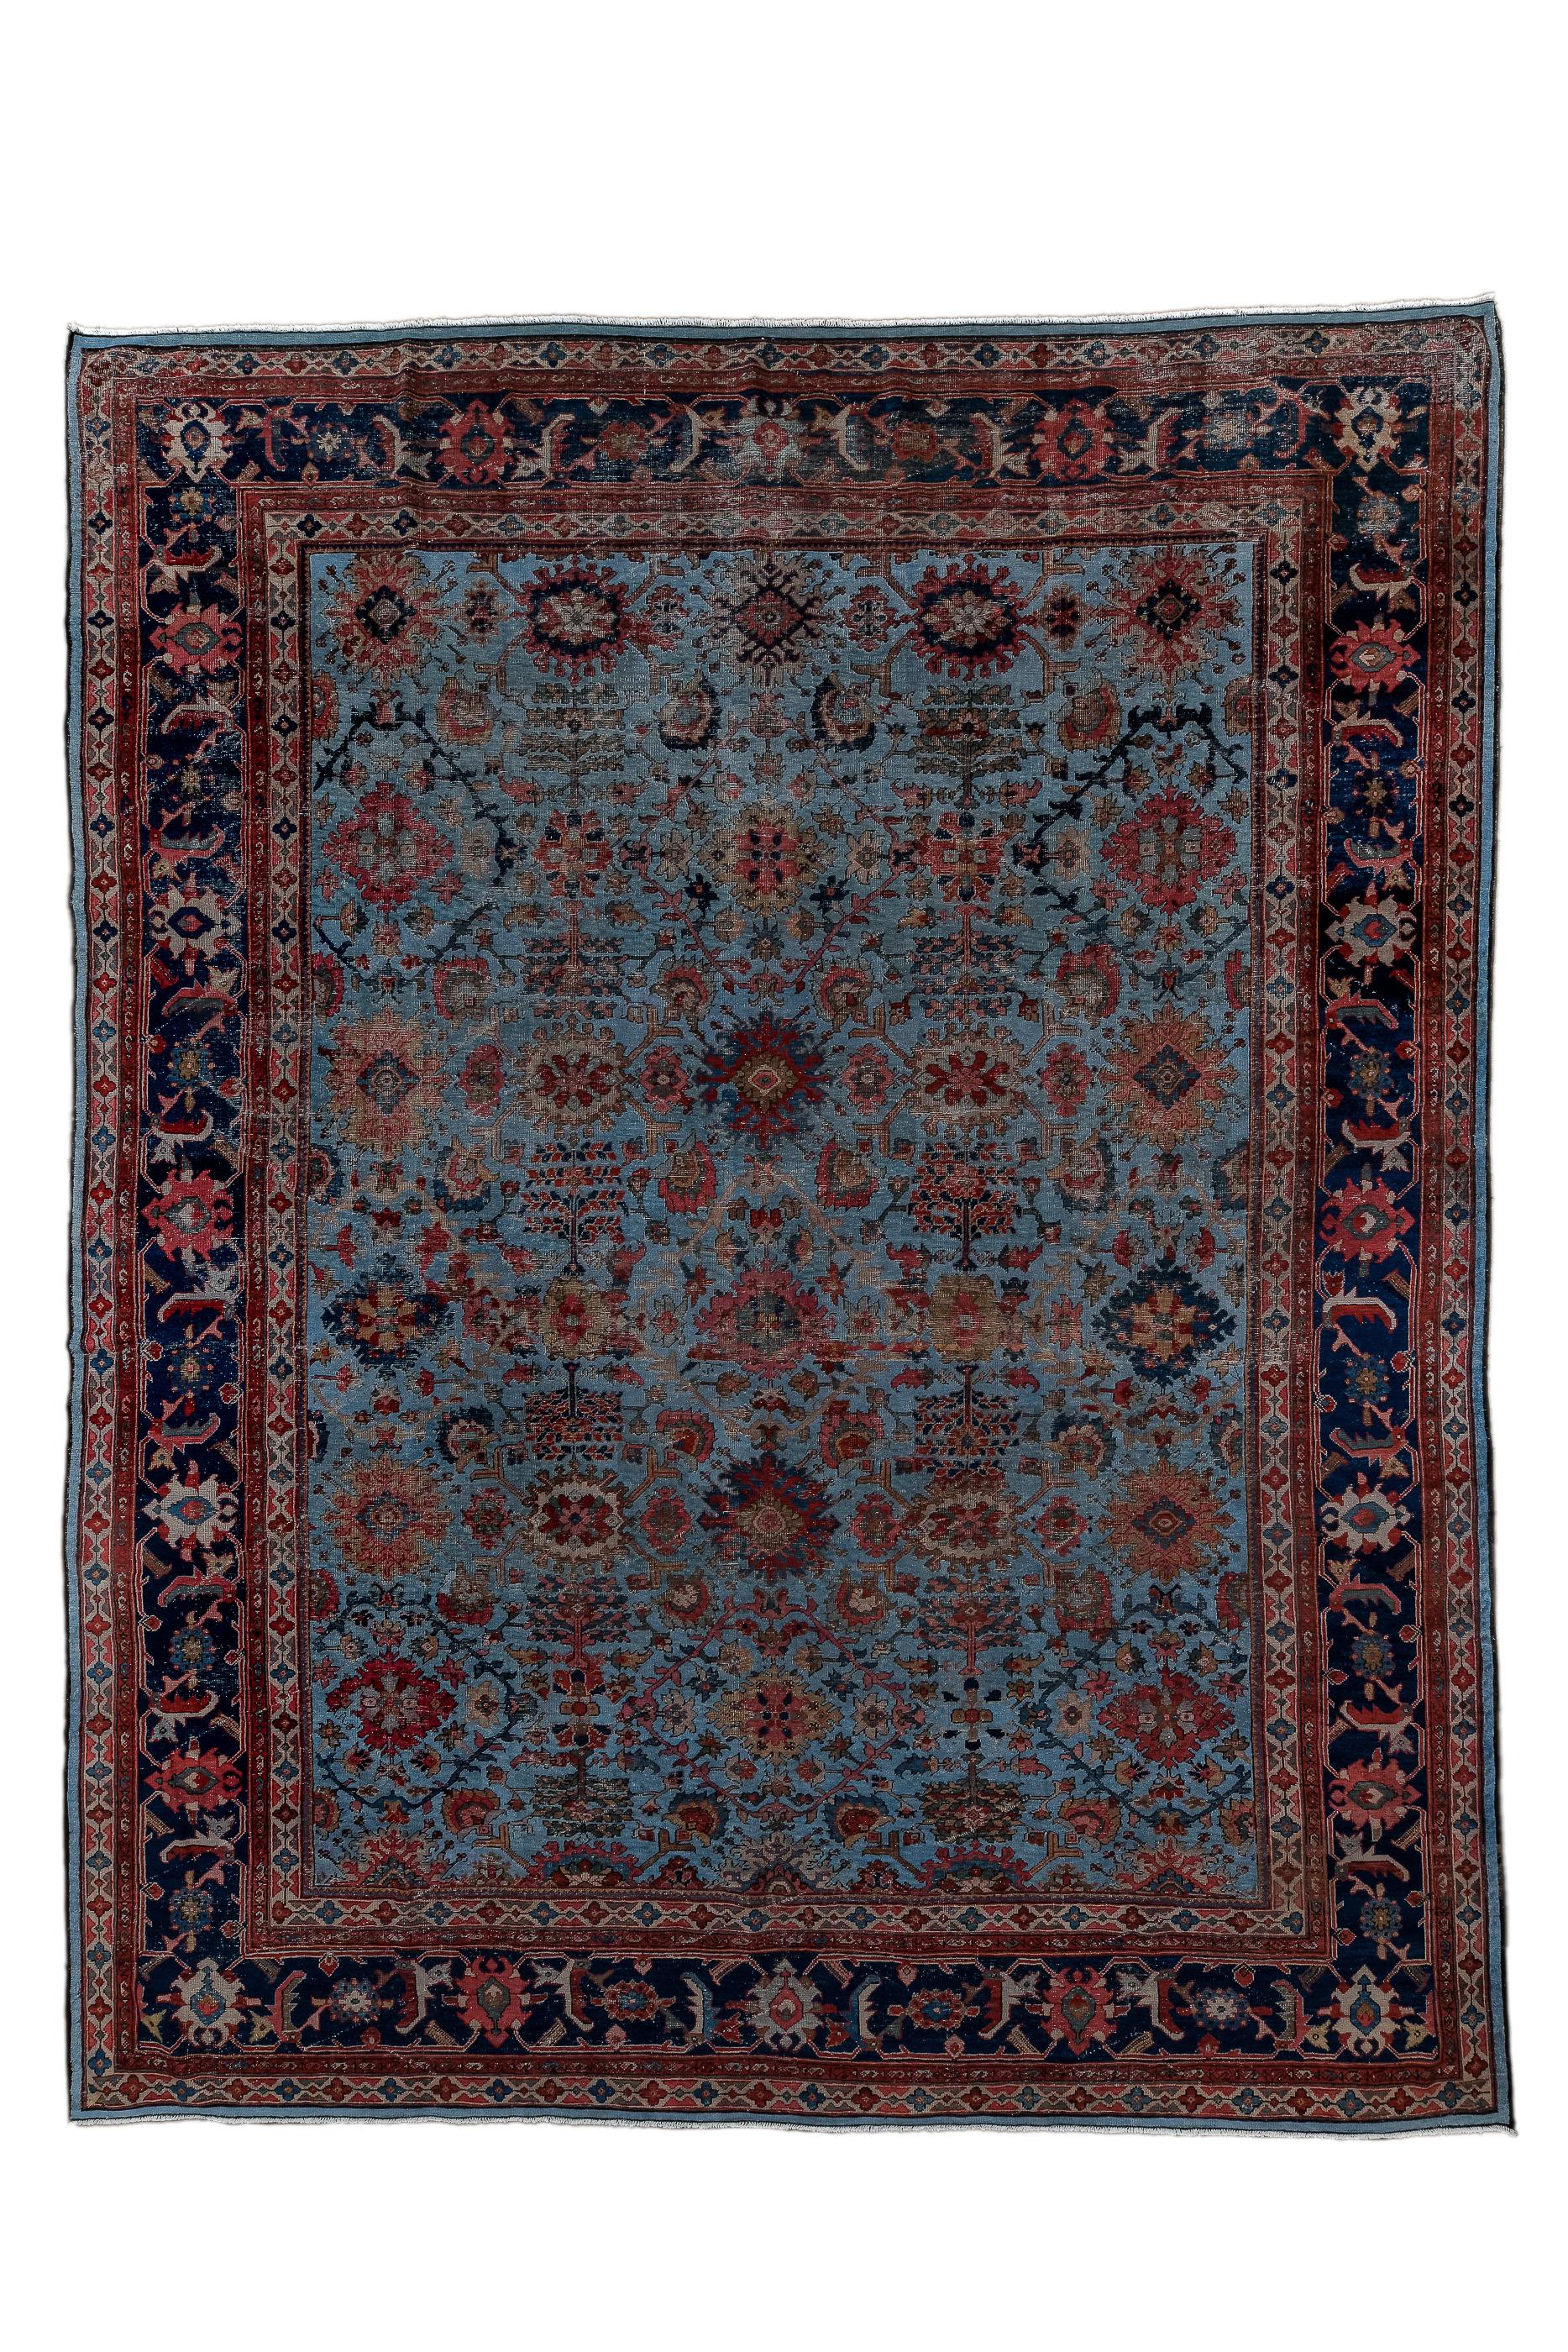 This modestly woven room size carpet shows a medium blue field with a five column, much modified Harshang design with symmetrical rosettes replacing ragged palmettes. Details in darker blue, rust, green and creamy beige.  Dark blue strip style